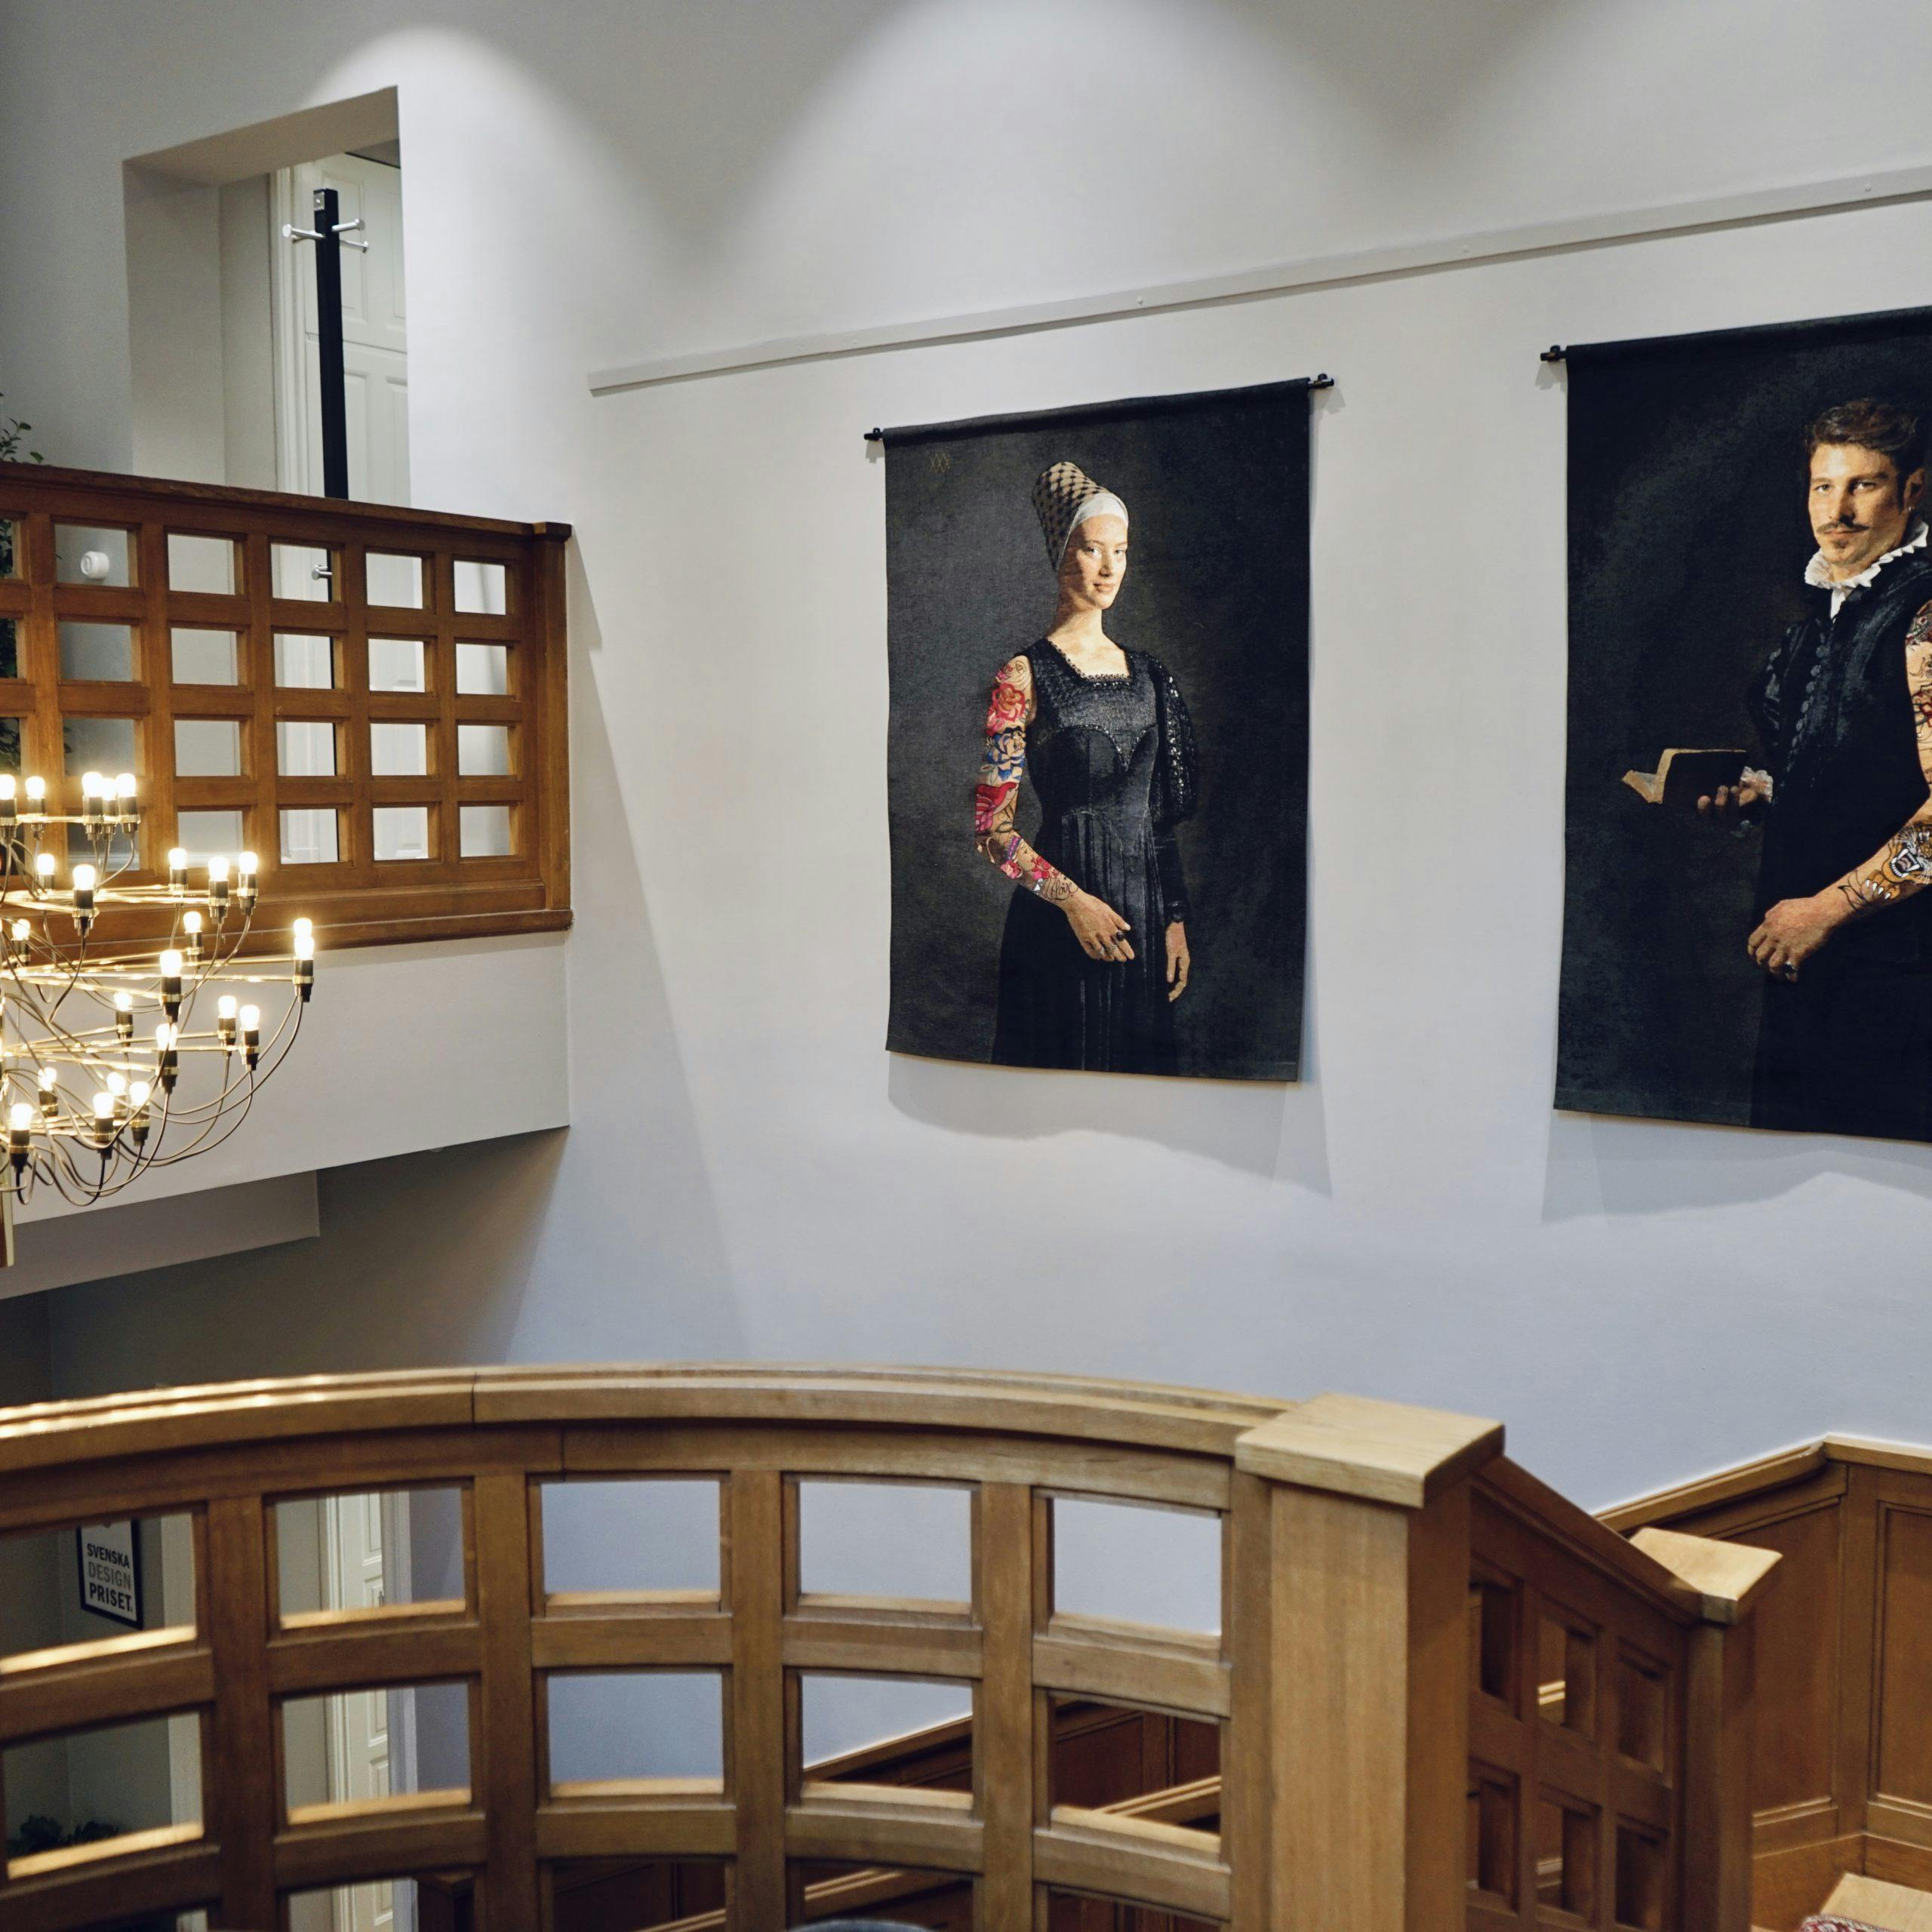 Paintings depicting a man and a woman on the wall in the stairwell at Consid's office in Linköping.